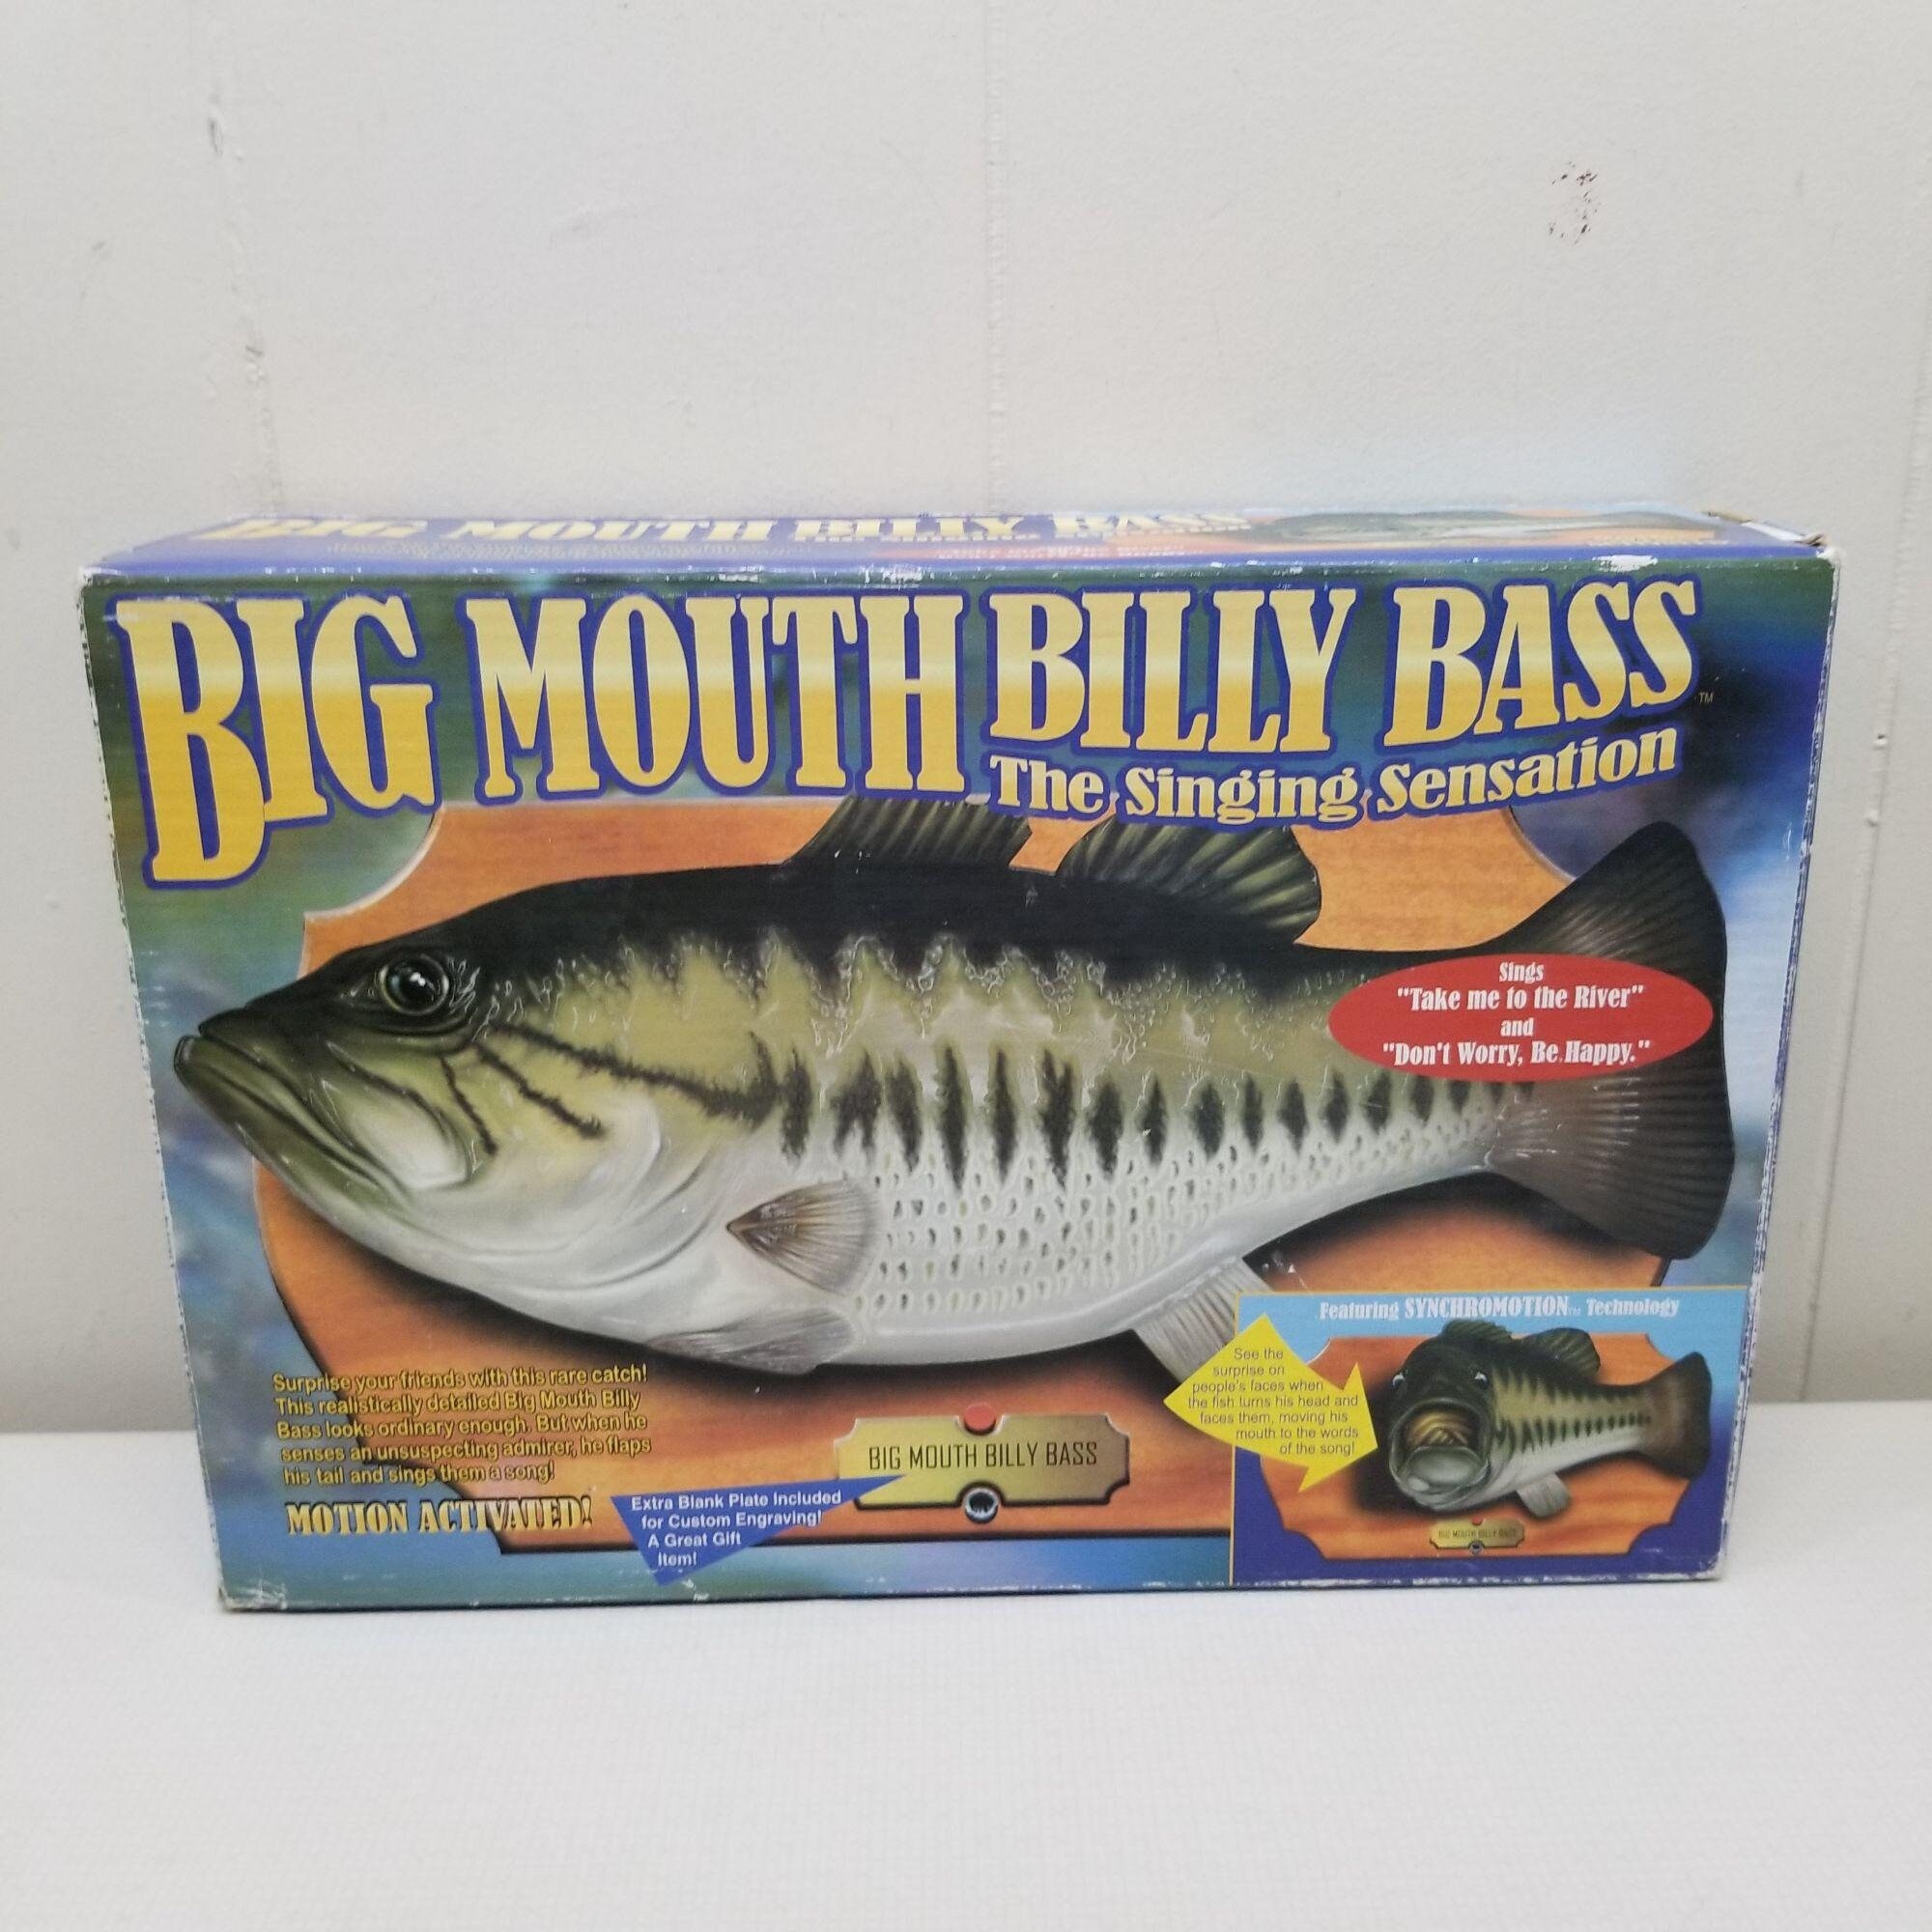 Vintage 1999 Big Mouth Billy Bass Gemmy Singing Fish Be Happy/Take Me to River 